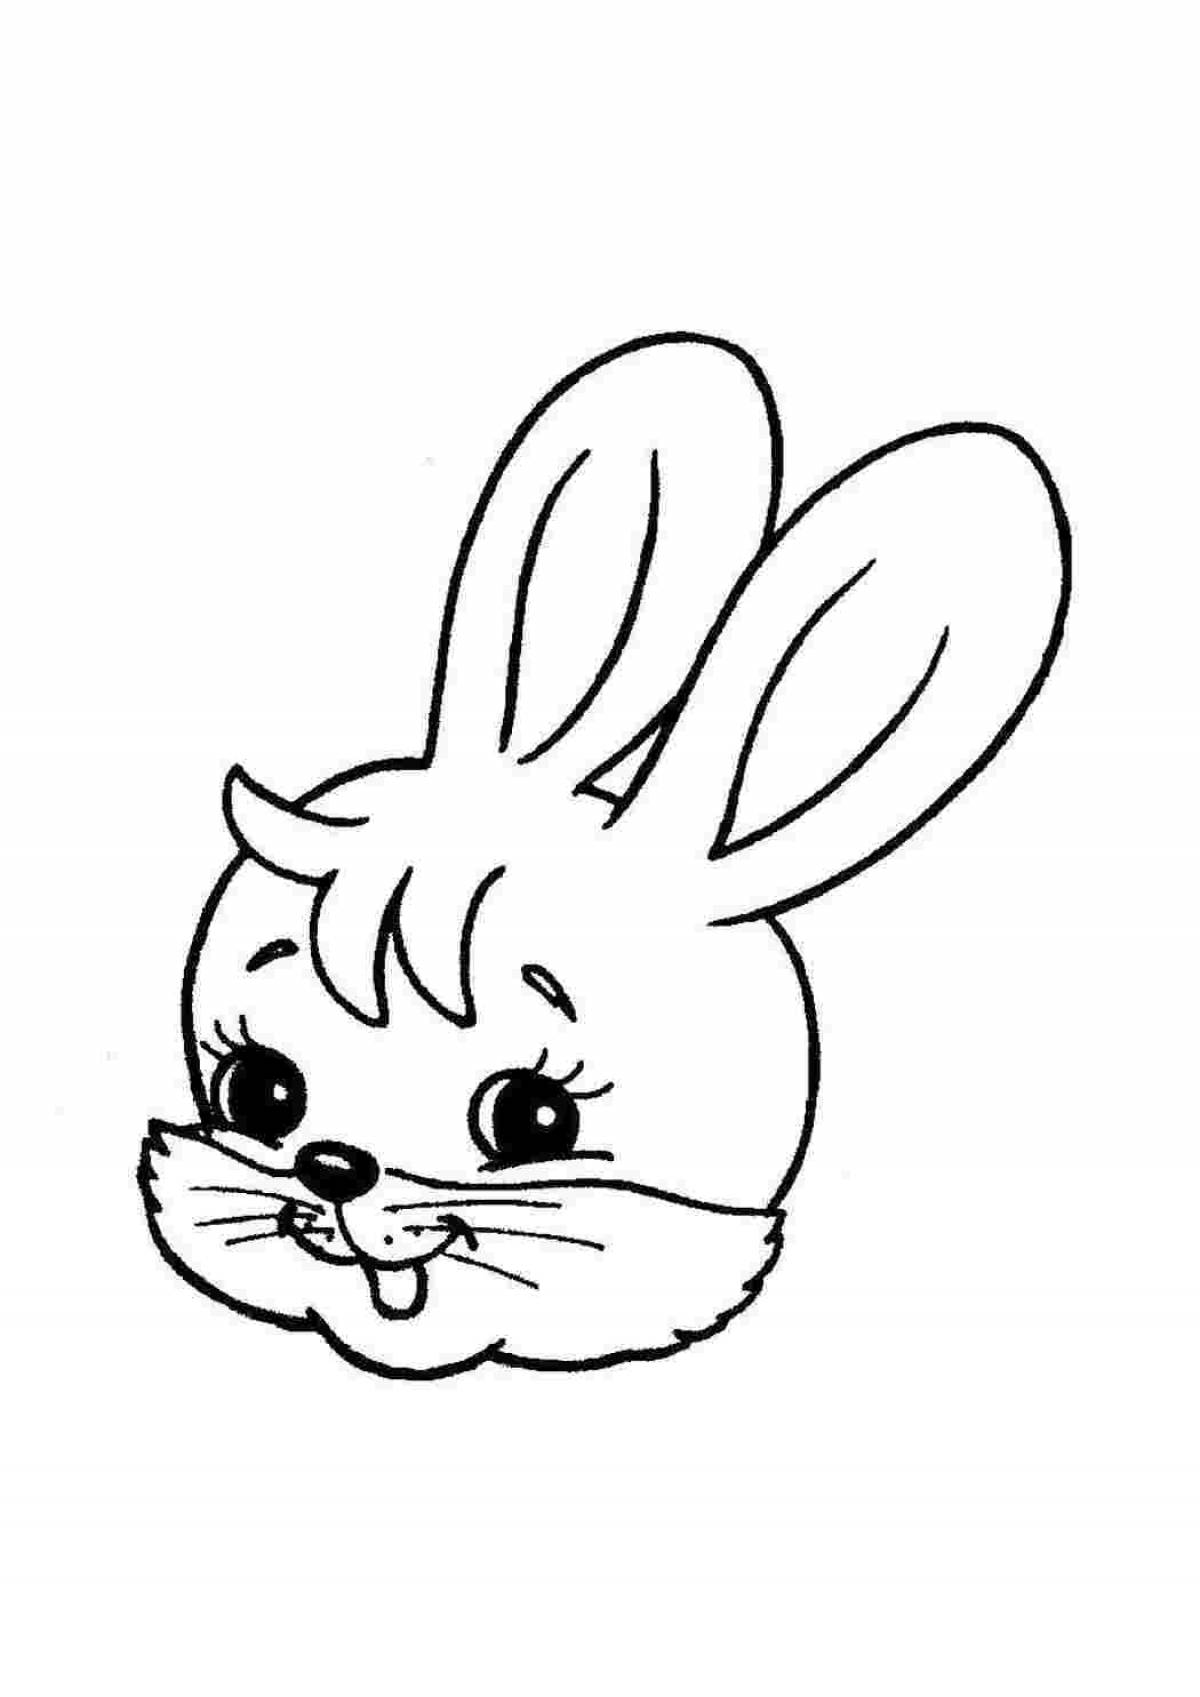 Entertaining hare coloring page